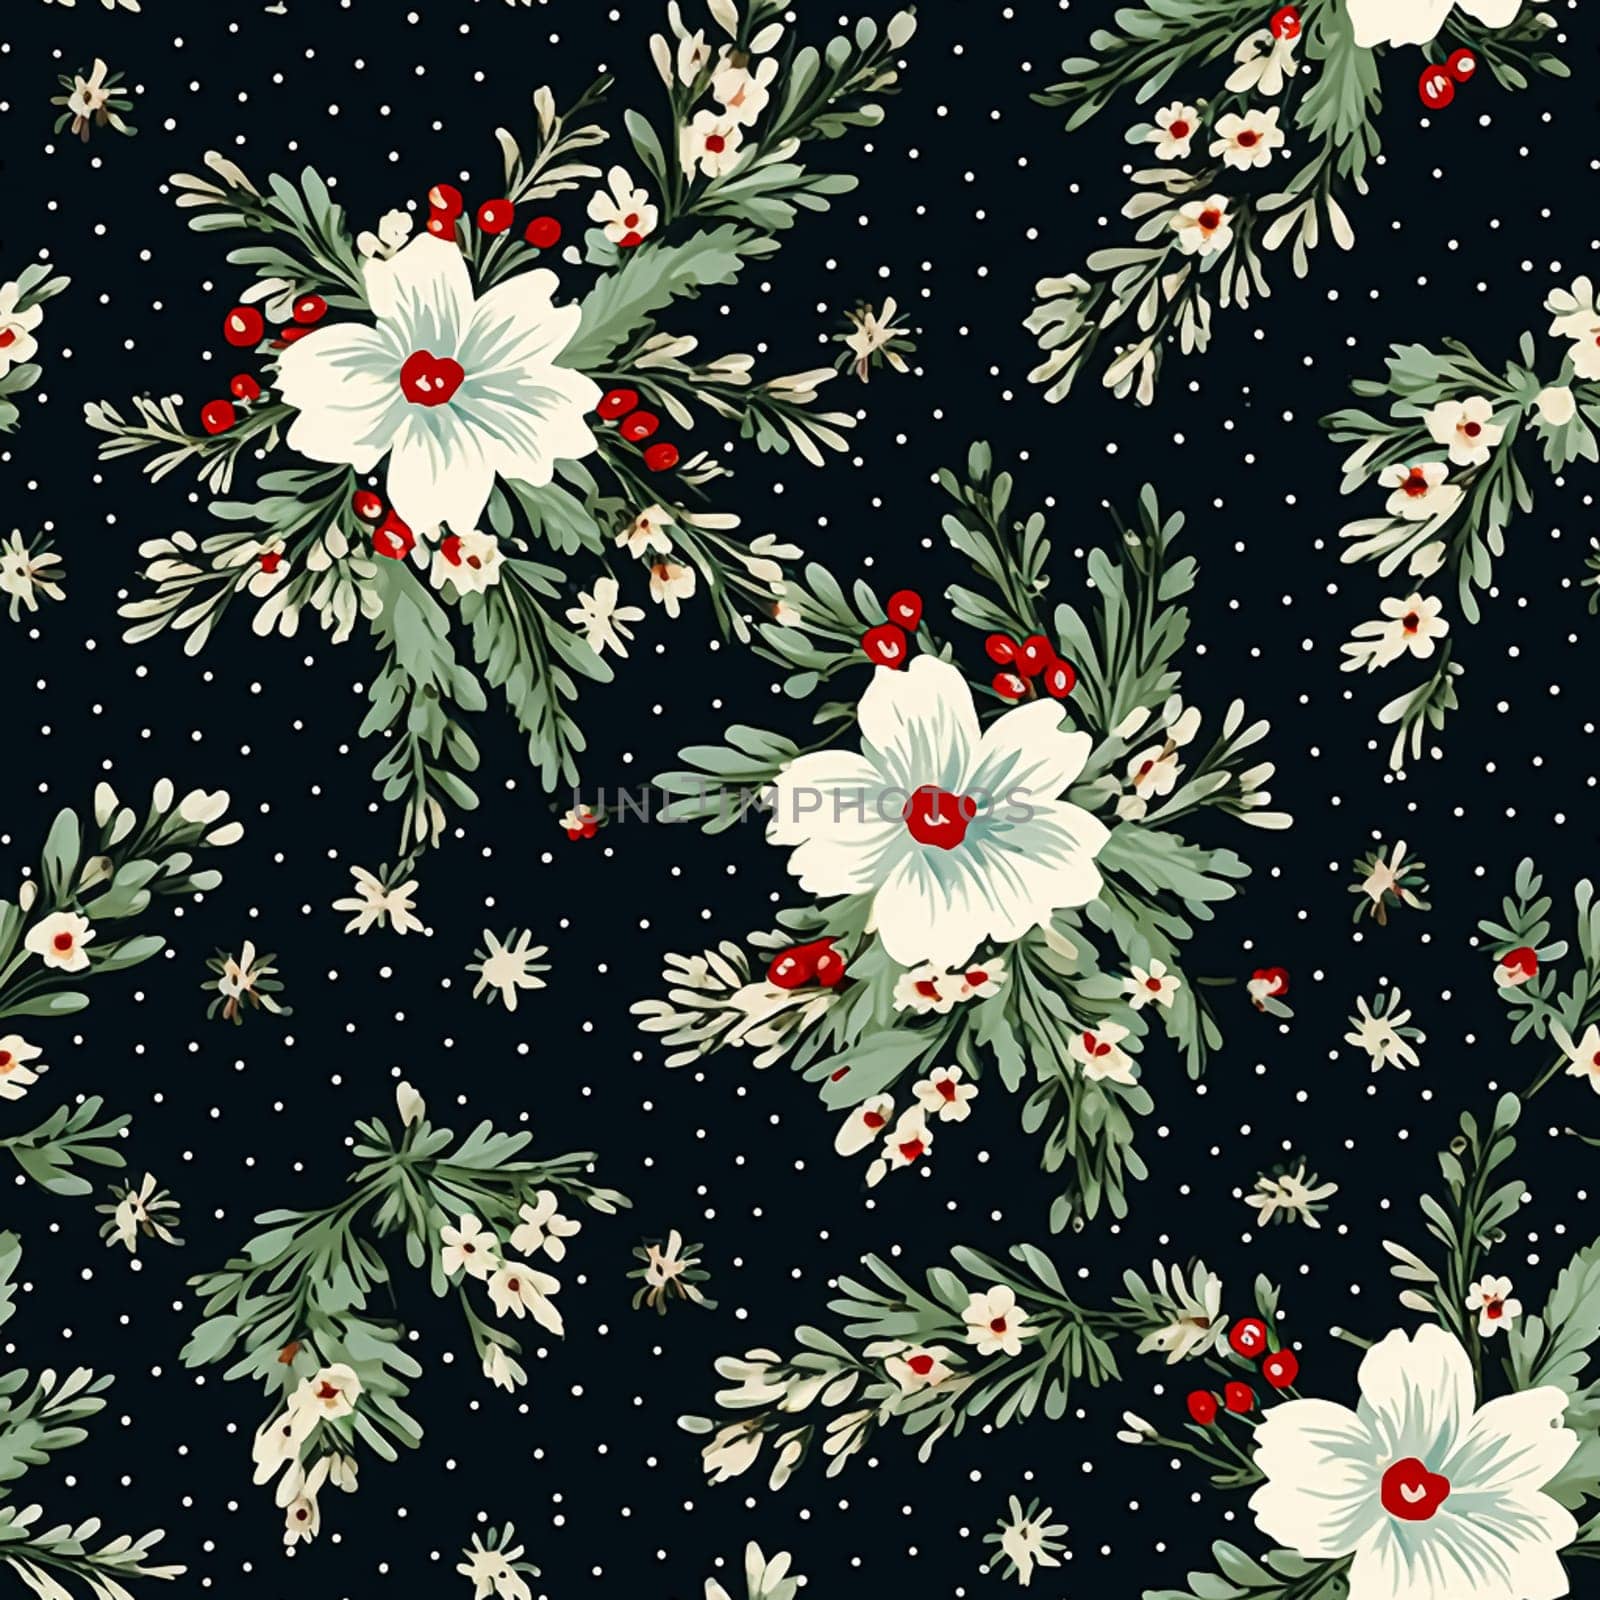 Seamless pattern, tileable Christmas holiday poinsettia floral country dots print on black, English countryside flowers for wallpaper, wrapping paper, scrapbook, fabric and product design motif